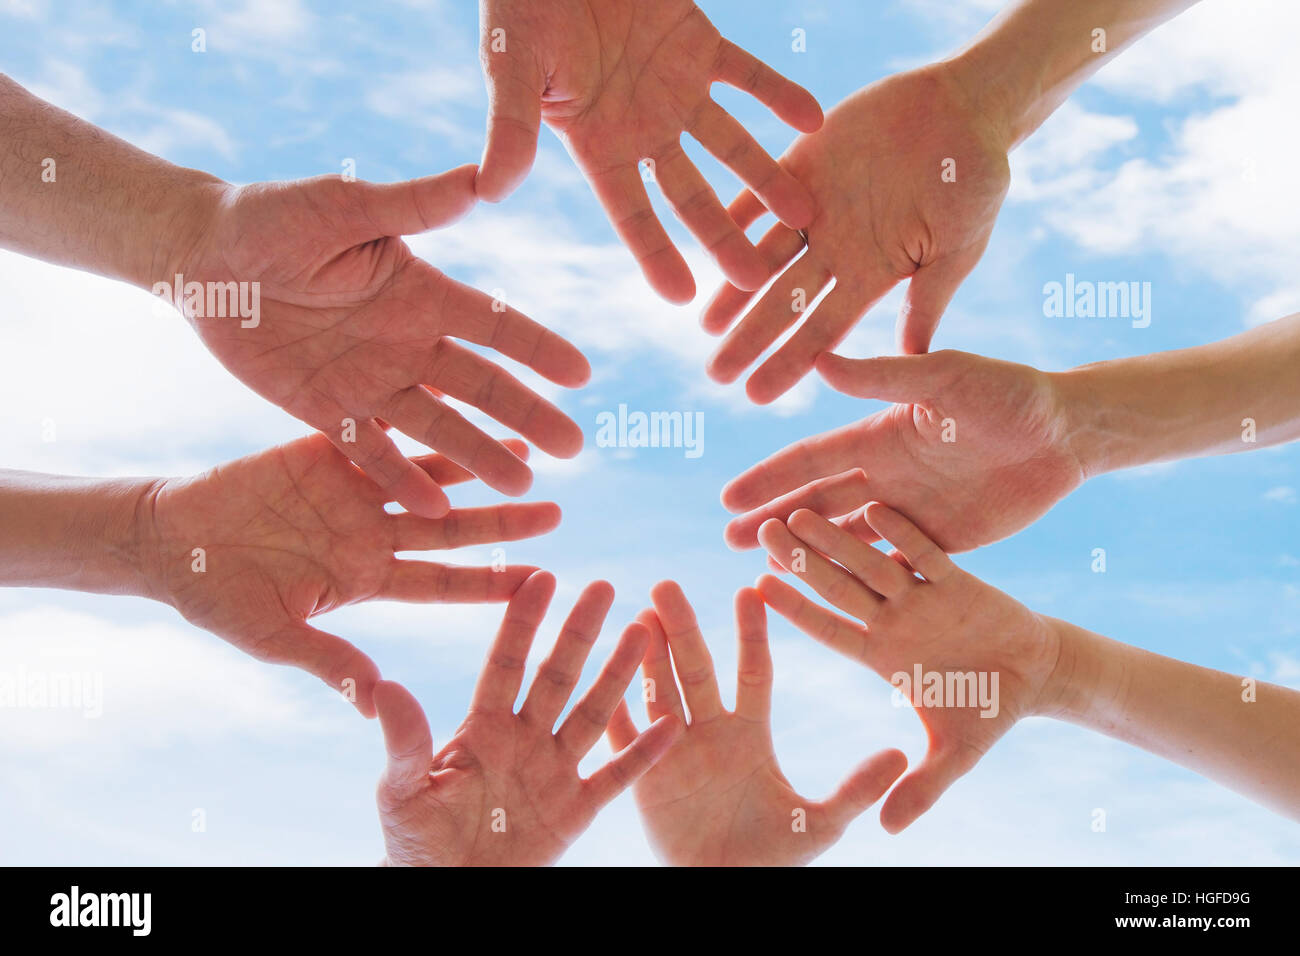 team or brotherhood concept, group of people putting hands together against blue sky Stock Photo